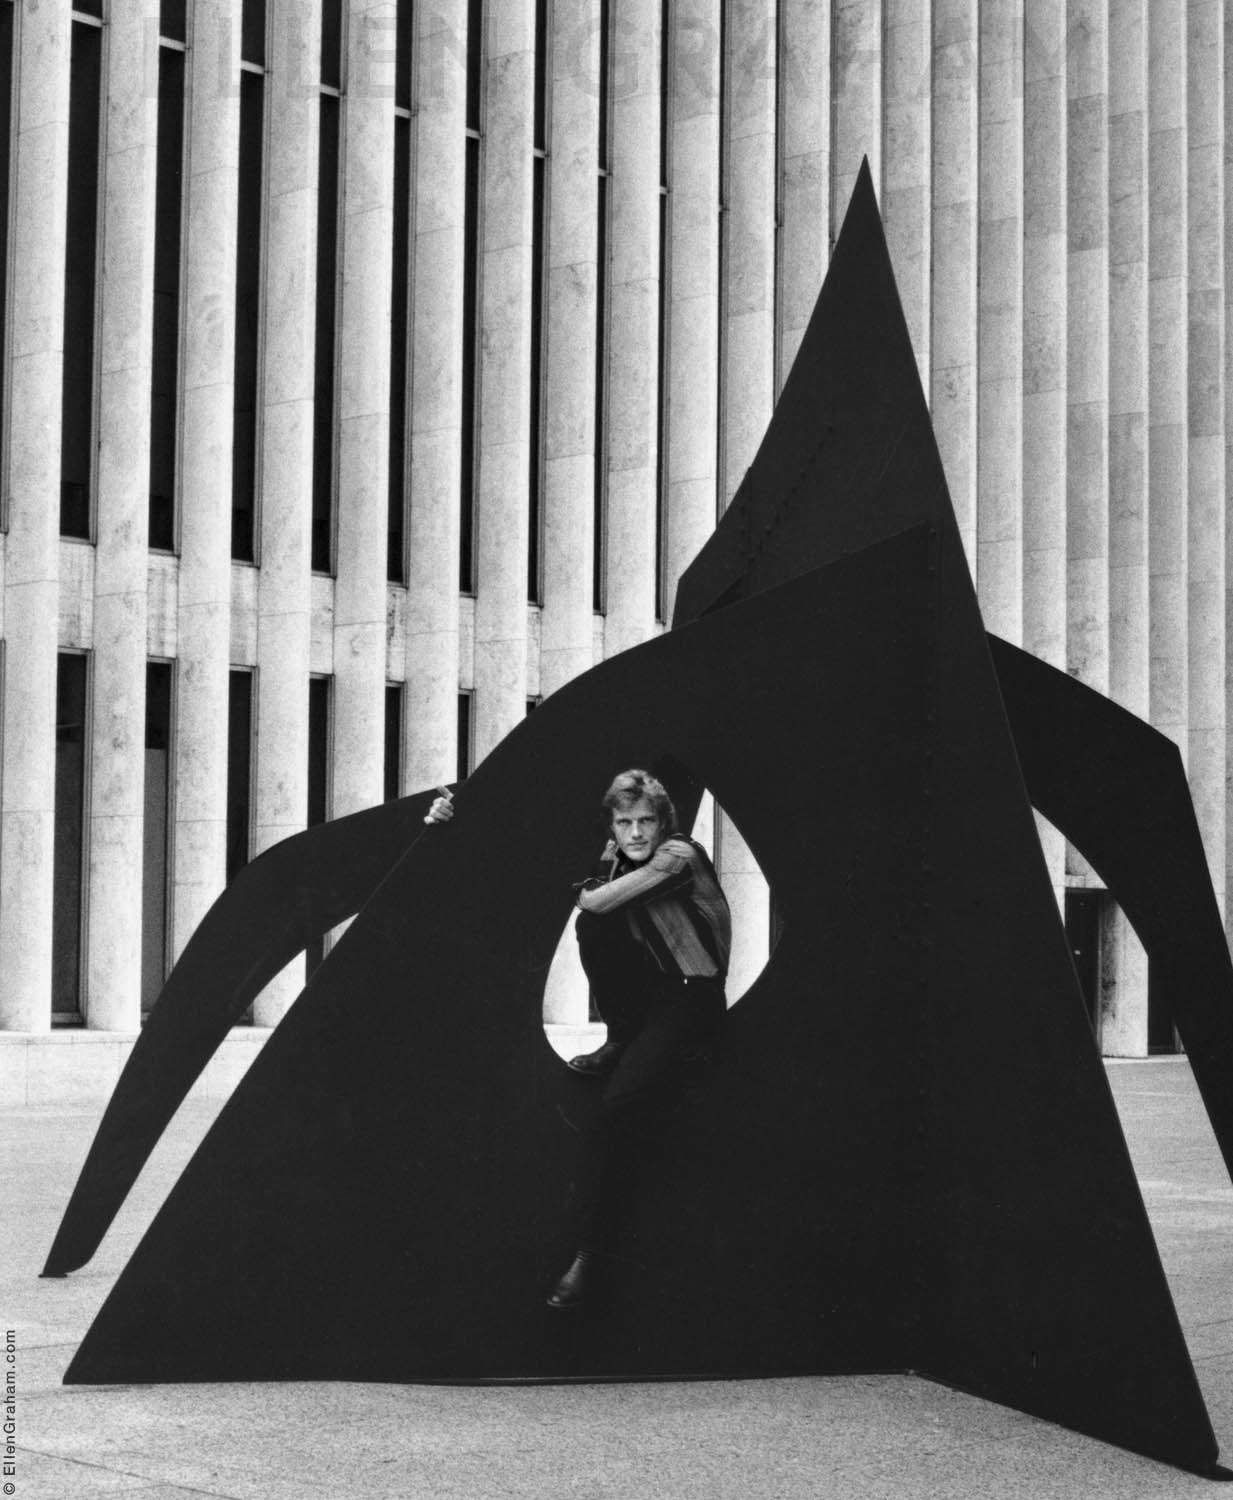 Peter Martins, With Alexander Calder Sculpture, Lincoln Center, New York, NY, 1983